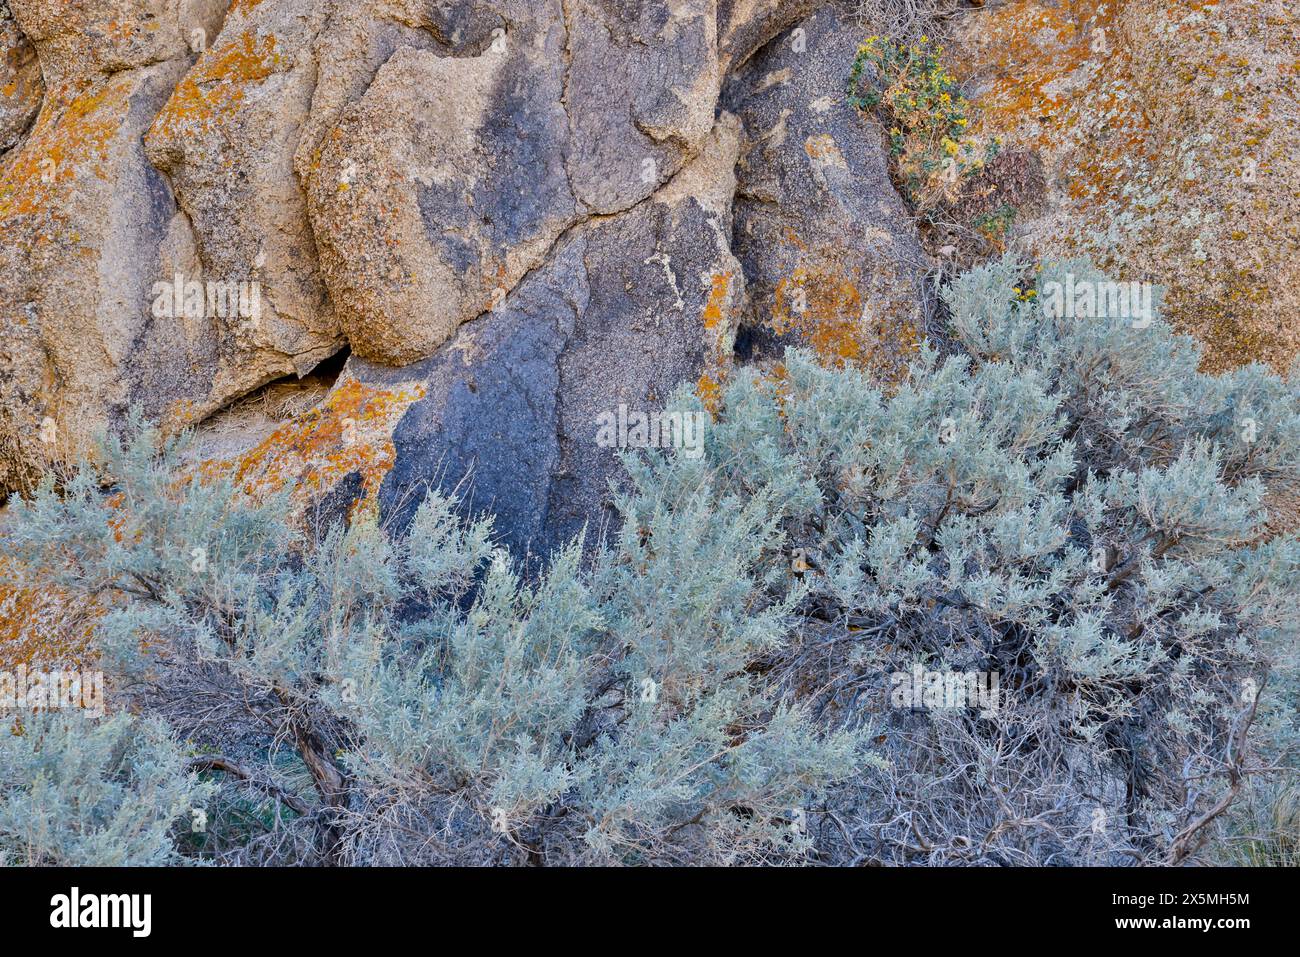 USA, California, Lone Pine, Inyo County. Alabama Hills with rock covered lichen and brush at base Stock Photo